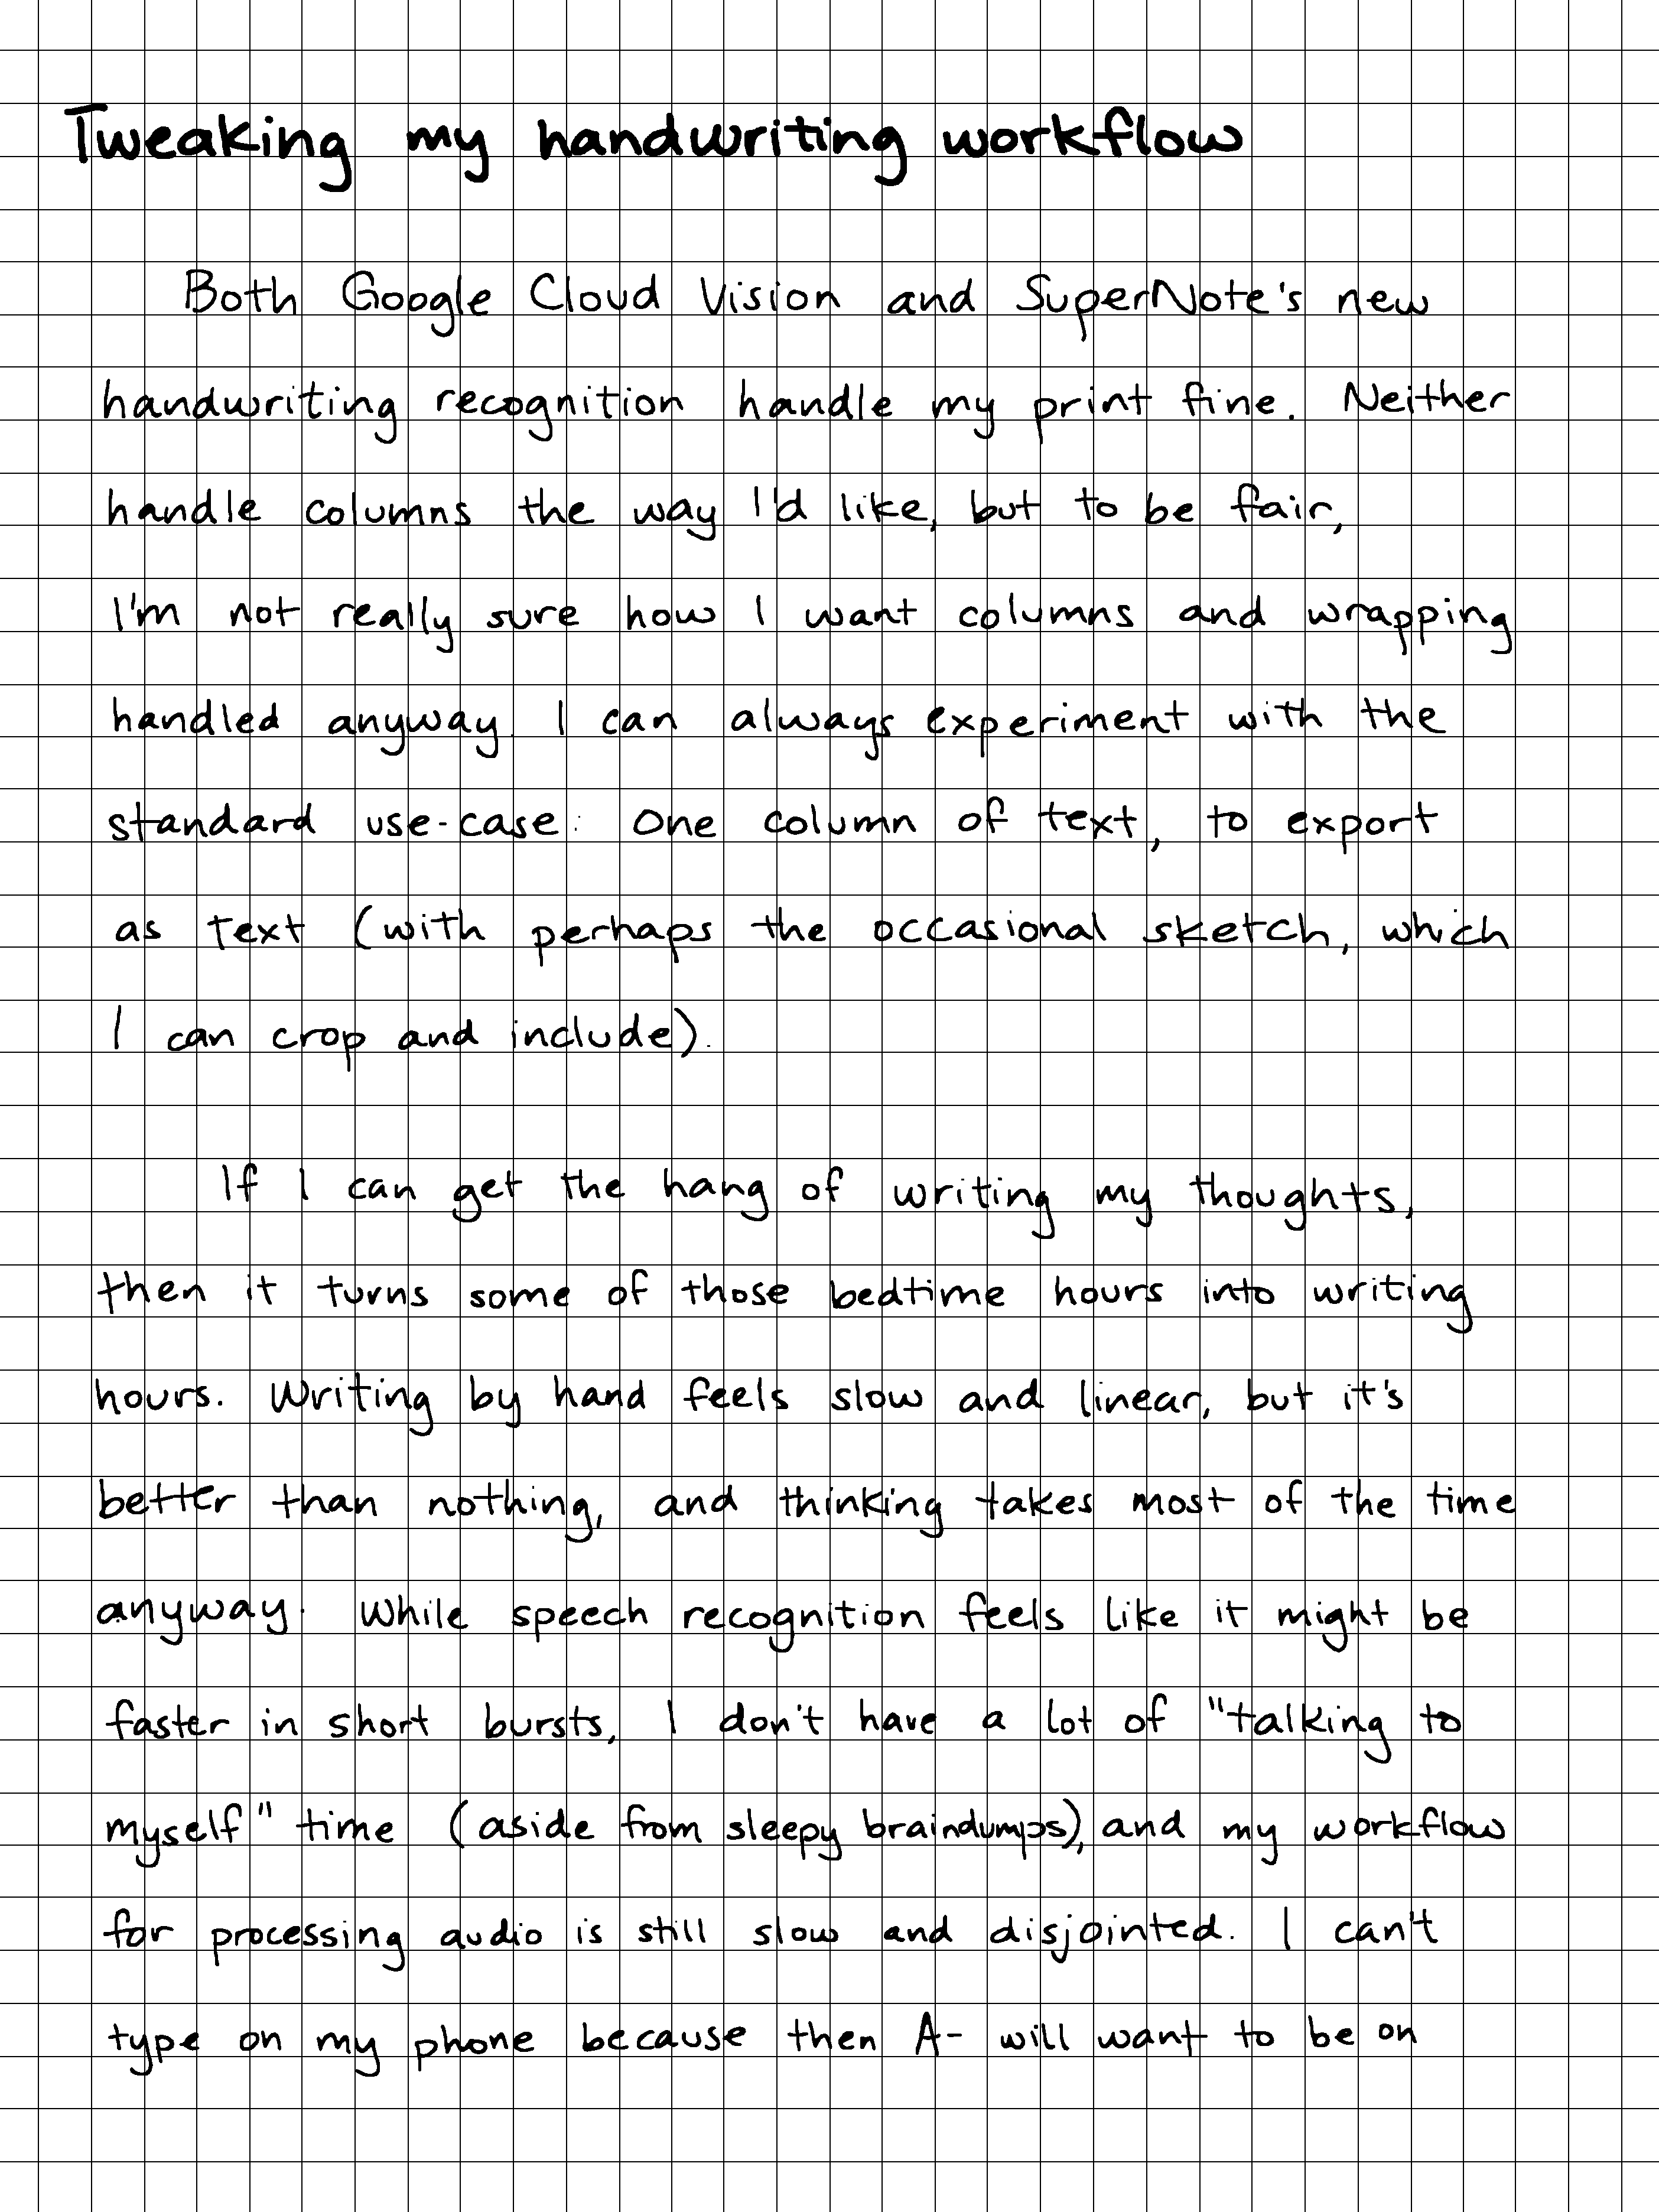 "The first page of my handwritten post"